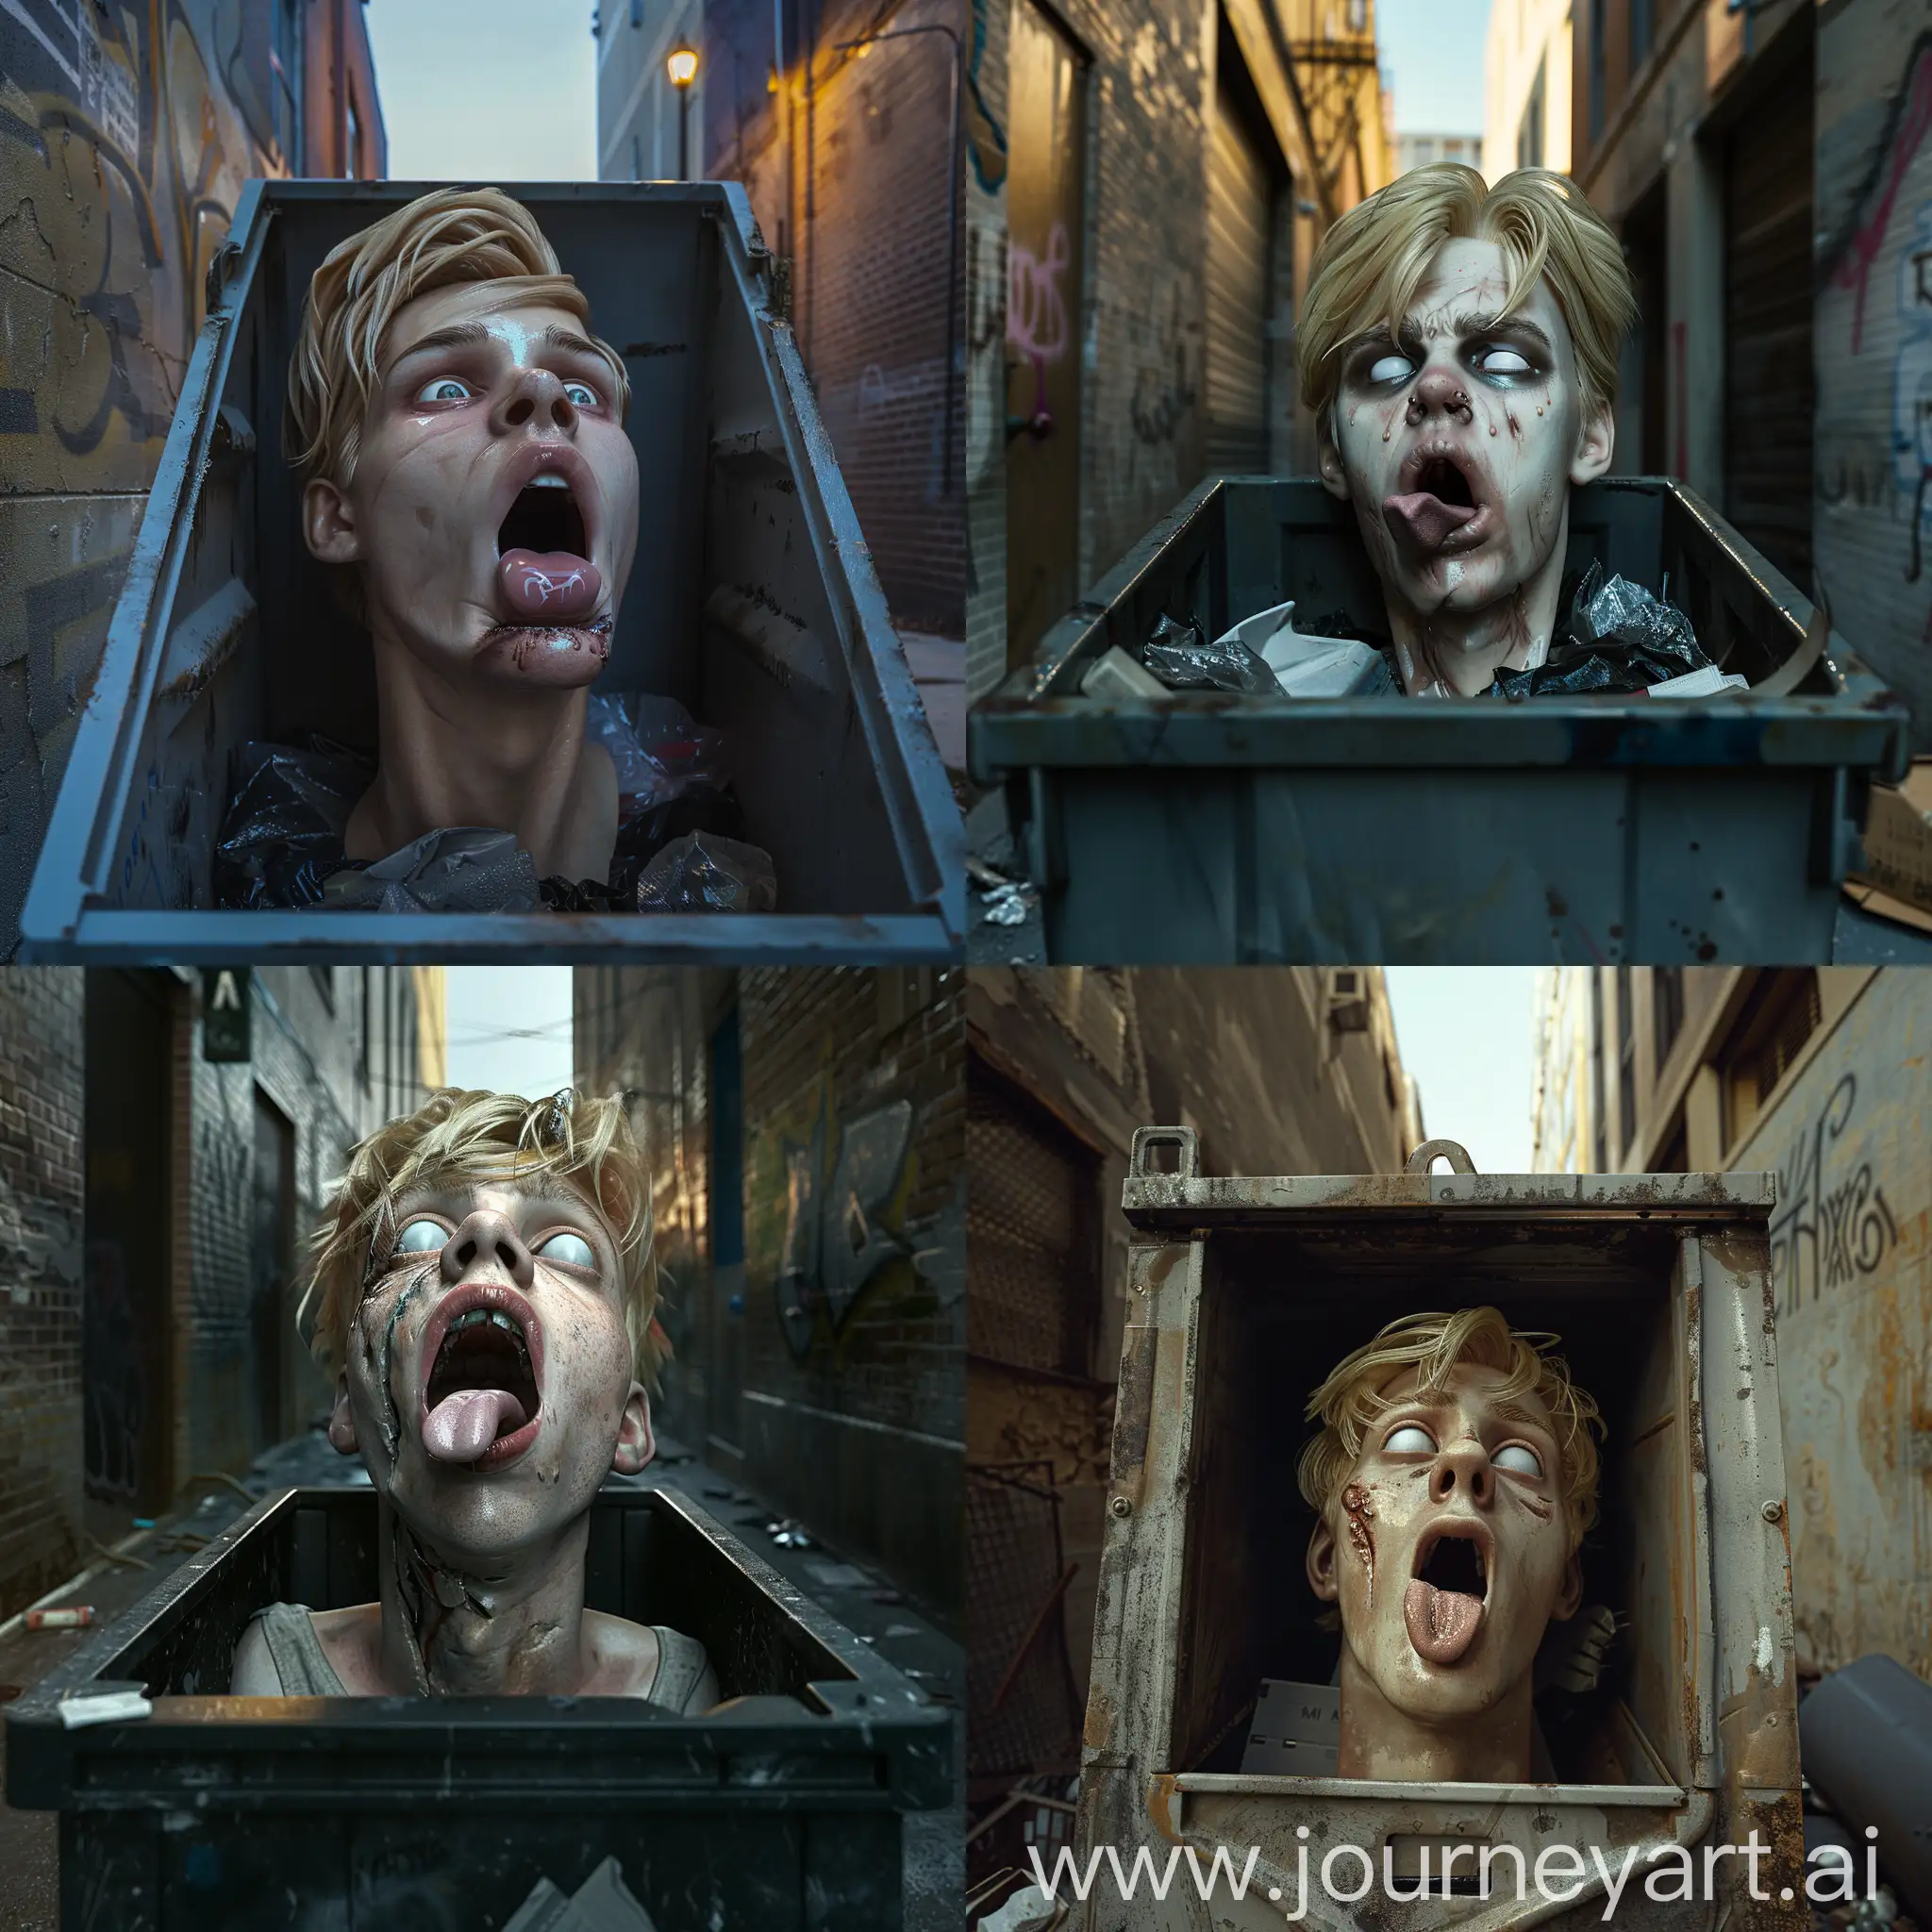 Cinematic lighting, A realistic detached prototype head of a young handsome man inside a dumpster, a good looking young blond male prototype head lying inside a trash dumpster, good looking face with yawning mouth and white blank eyes, with his tongue out, missing neck, Abandoned alley background